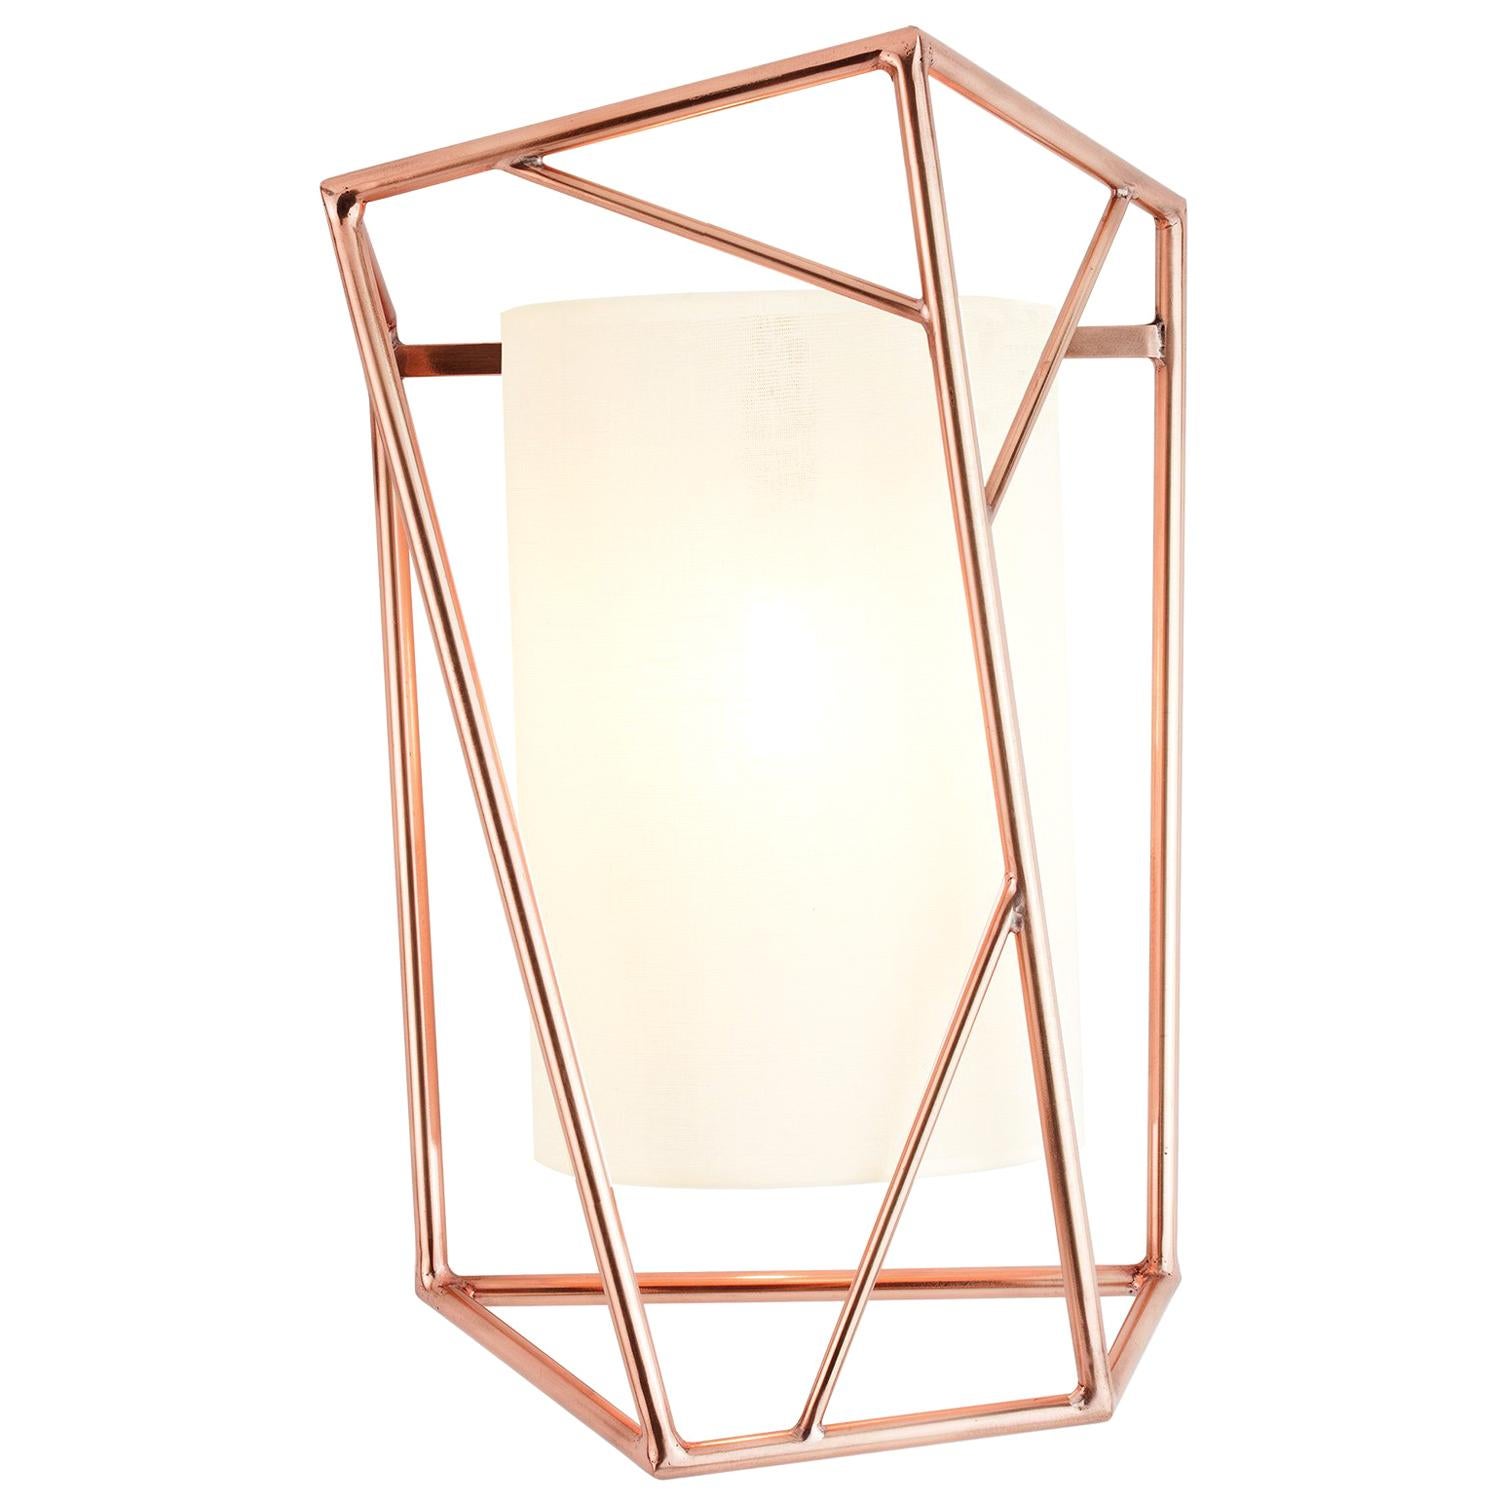 Art Deco Inspired Star Wall Sconce Polished Copper and Linen Shade